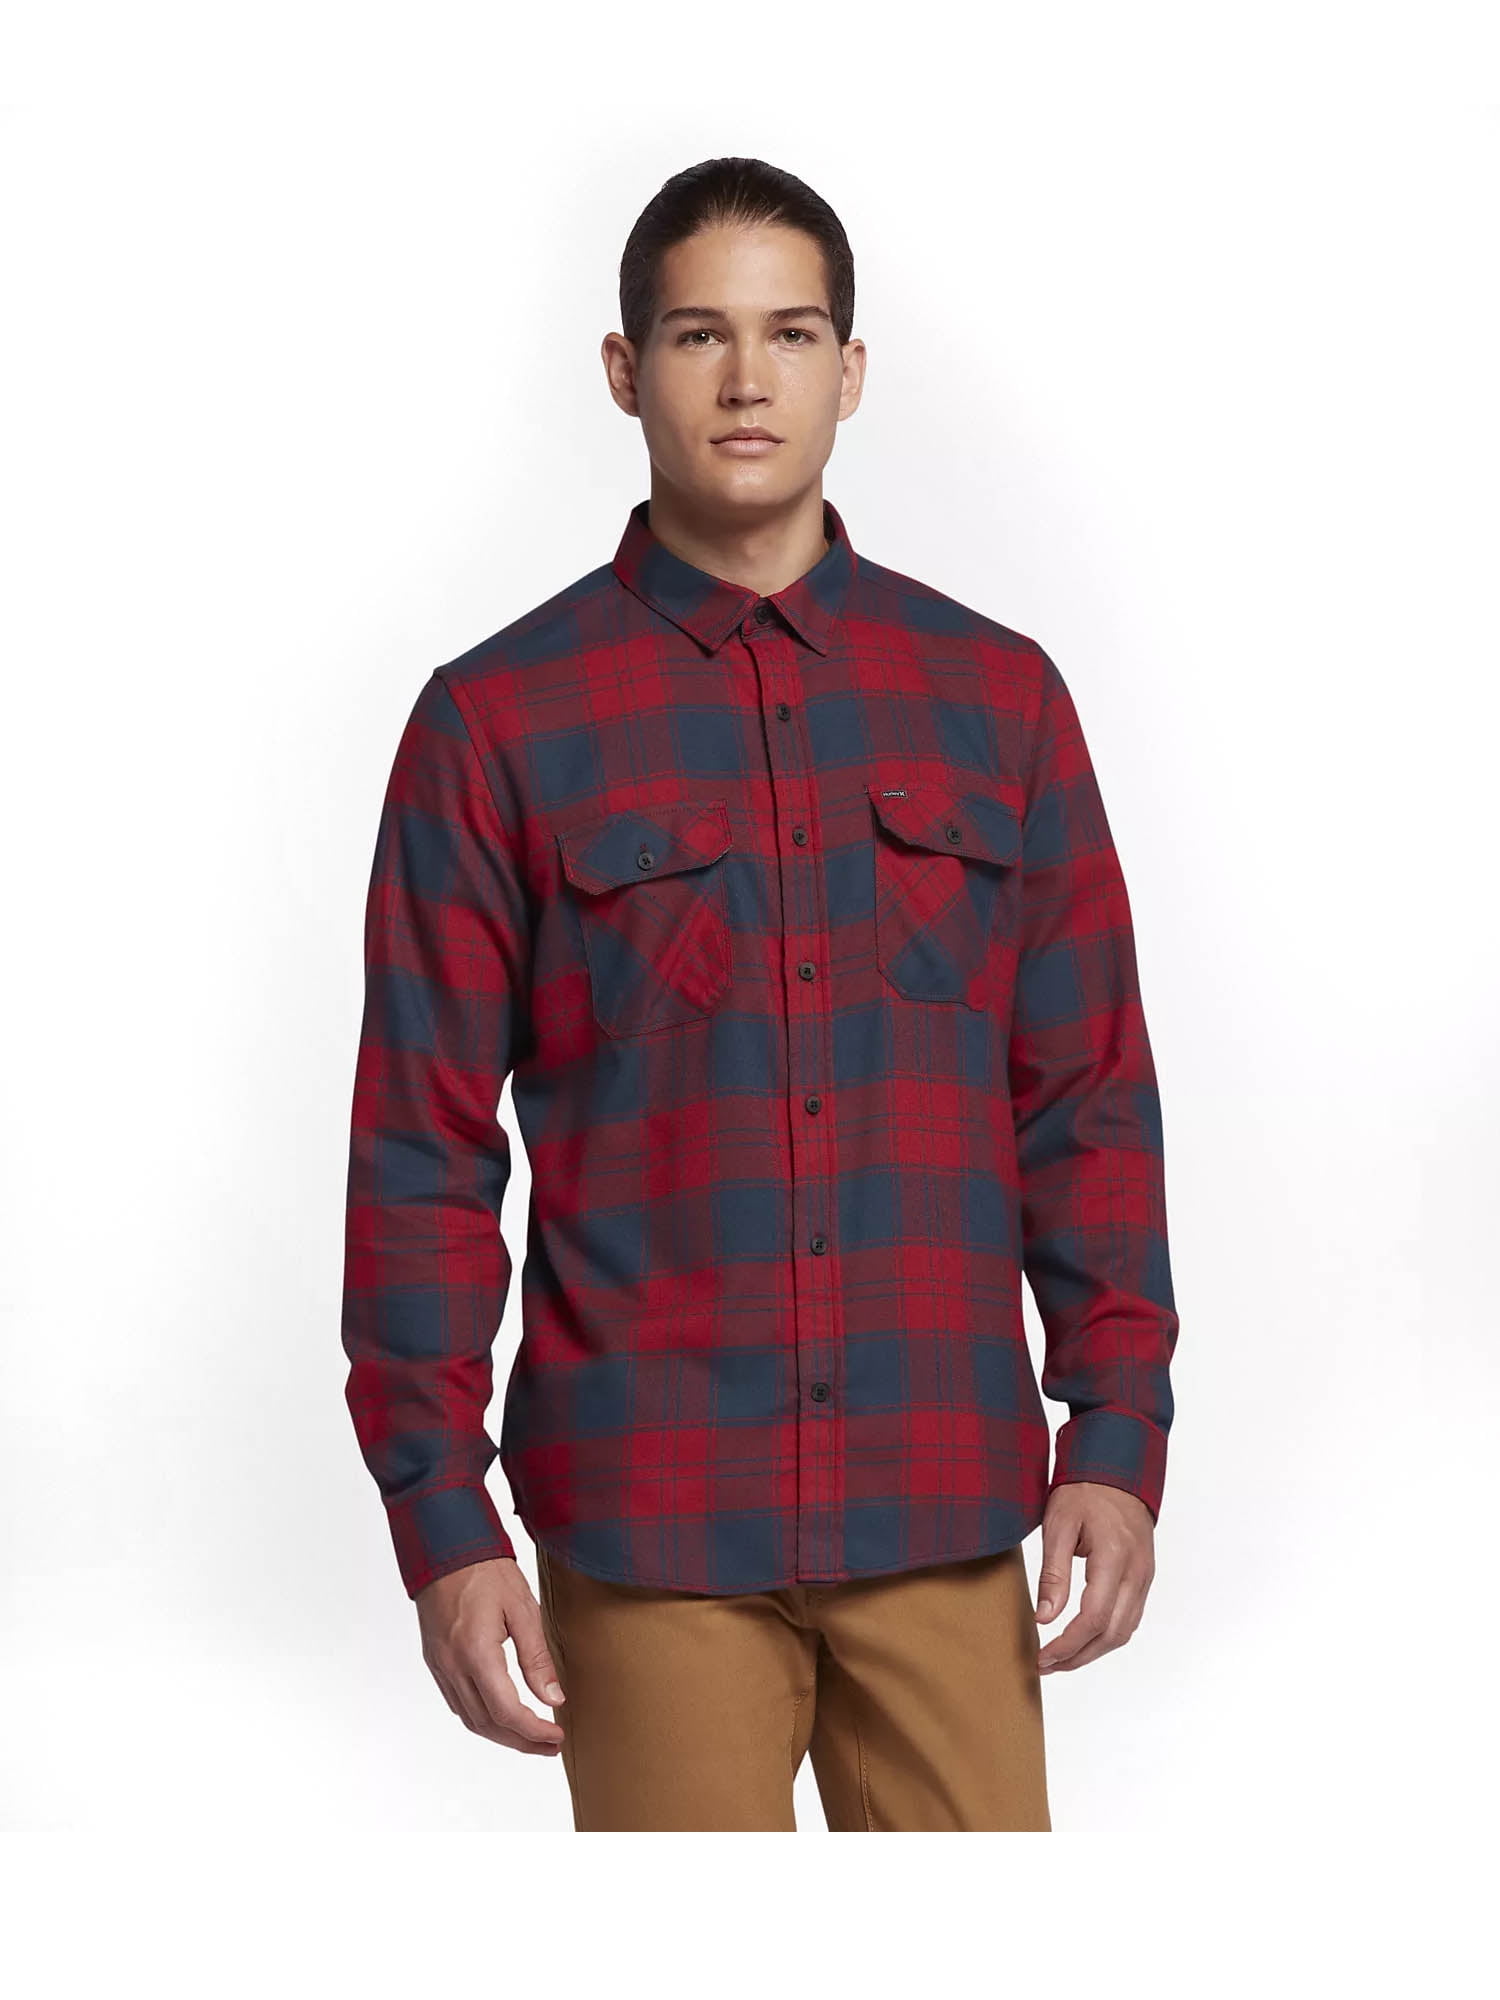 red button up long sleeve shirt